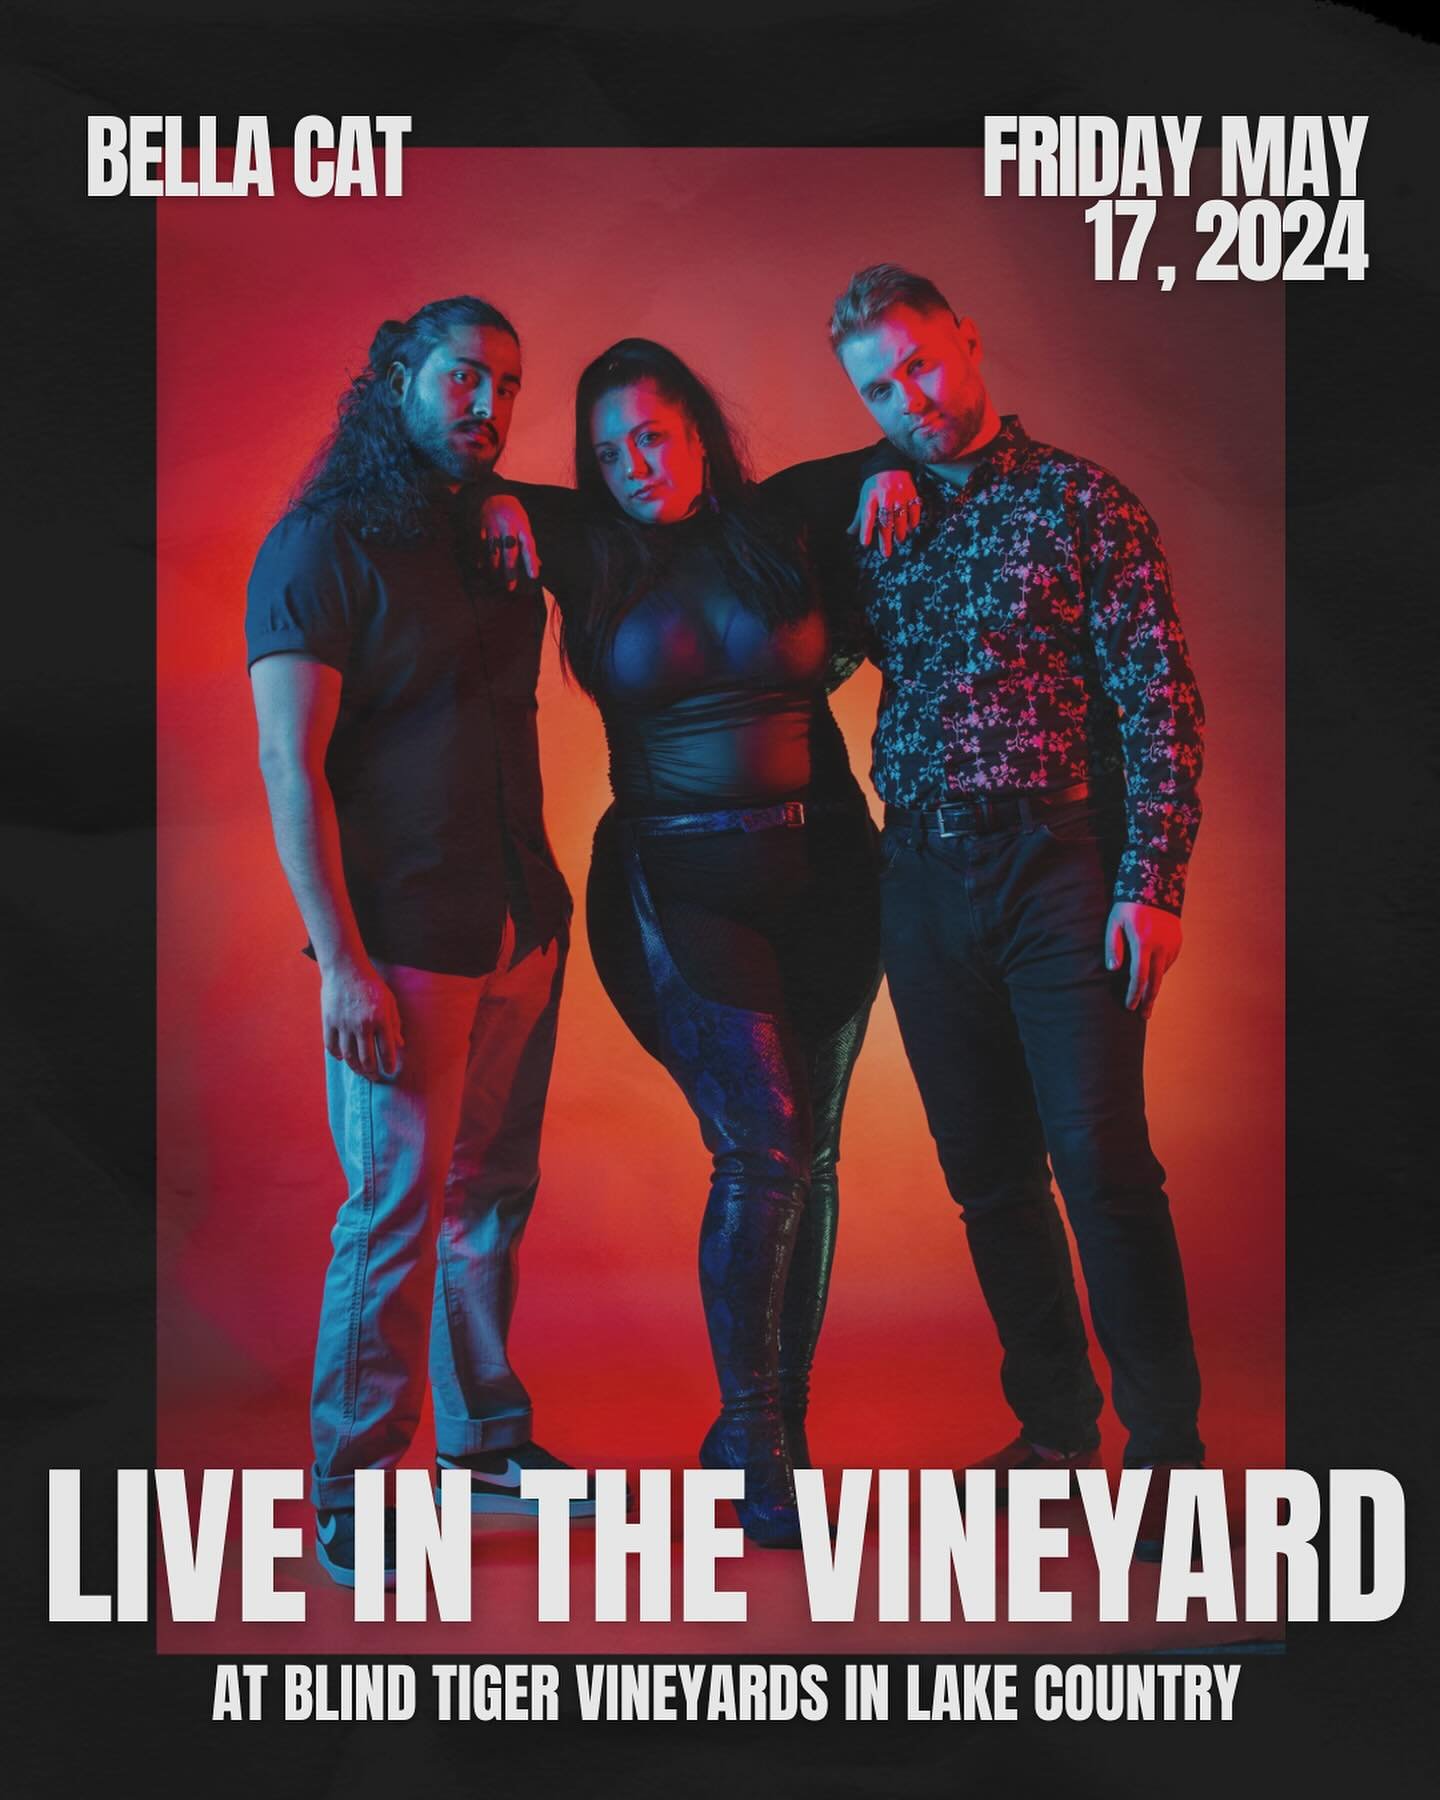 We are just one month away from our first Live in the Vineyard concert of the season! 🎵

Bella Cat will be taking the stage on Friday May 17 and Rick &lsquo;Poppa Dawg&rsquo; Halisheff is returning to the vineyard on Saturday May 18! 🙌🏻

Tickets a